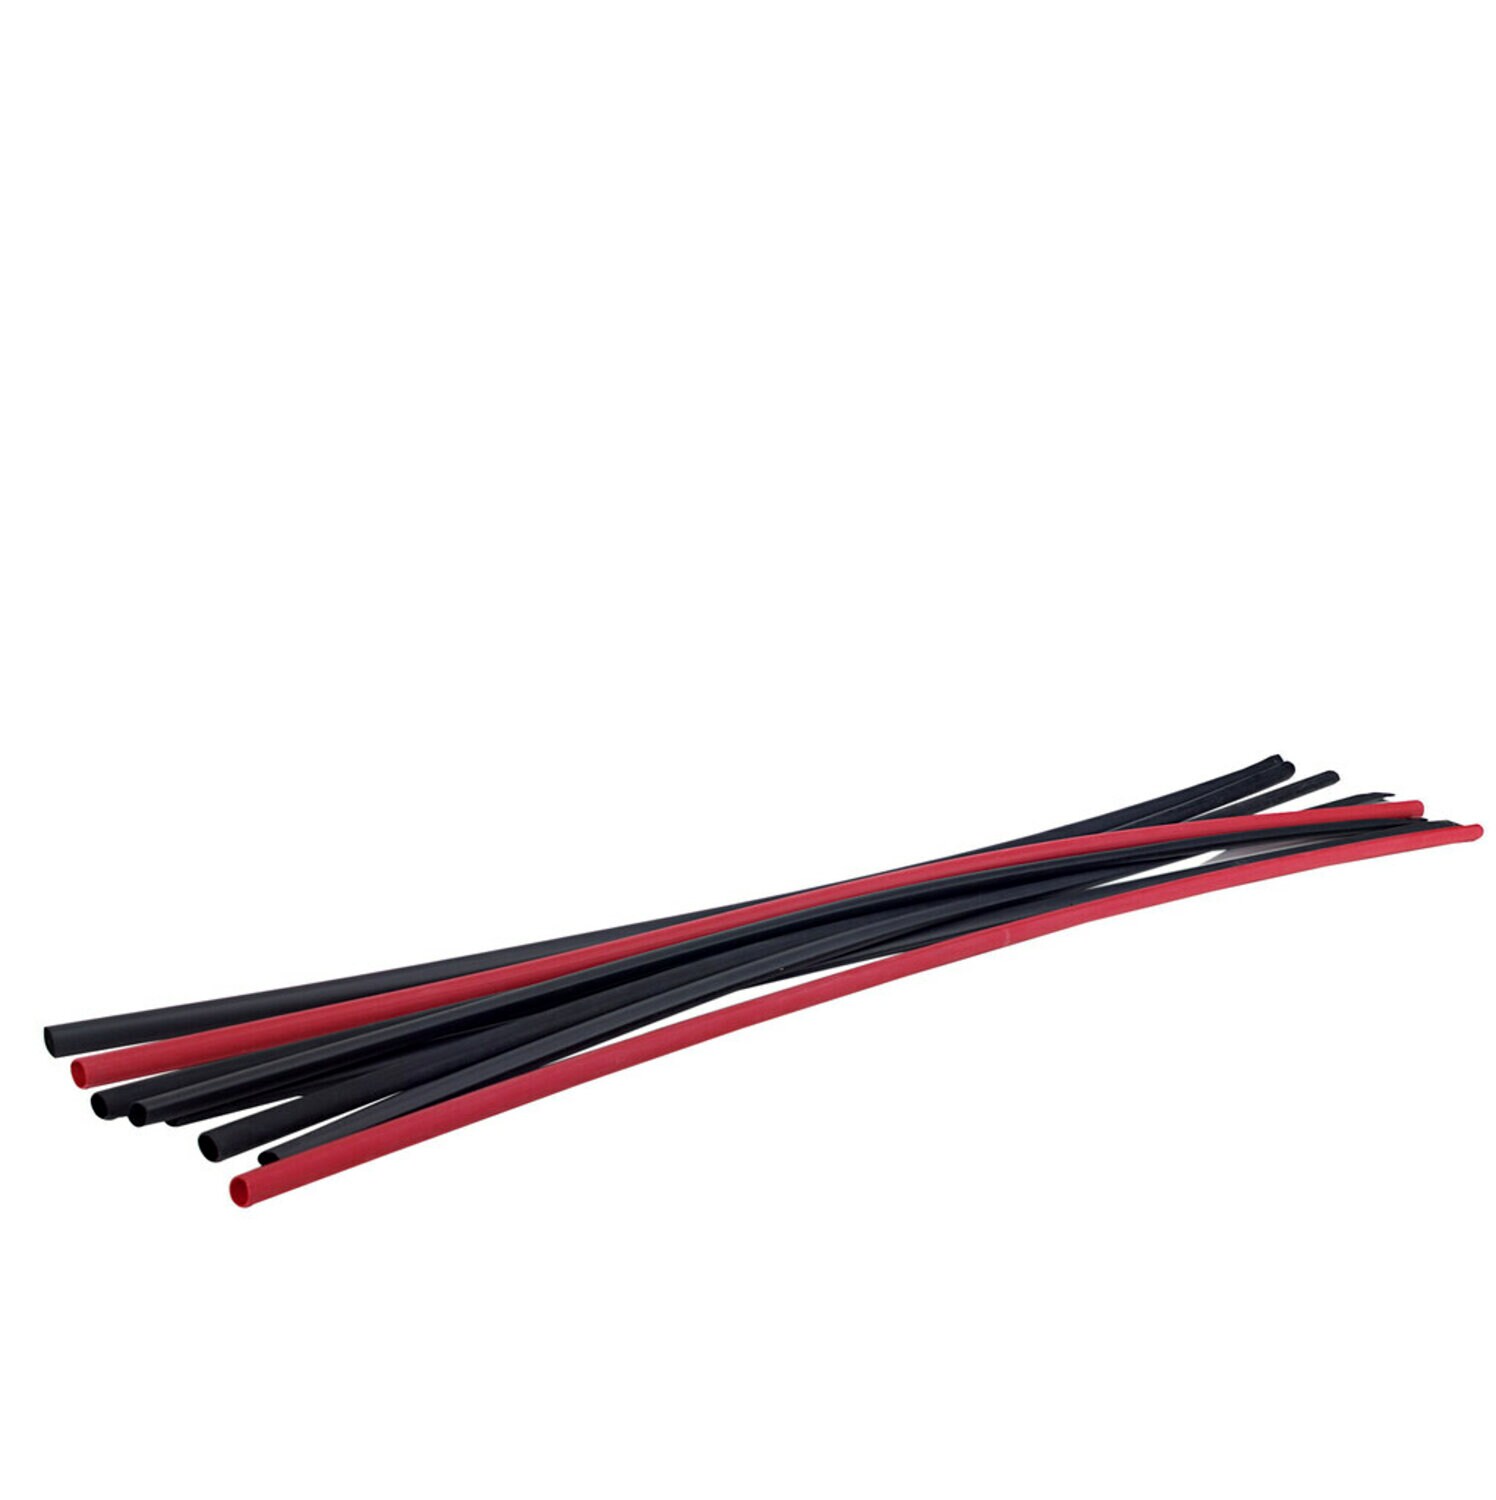 7000133554 - 3M Heat Shrink Thin-Wall Tubing FP-301-1/4-48"-Red-Hdr-12 Pcs, 48 in
Length sticks with header label, 12 pieces/case